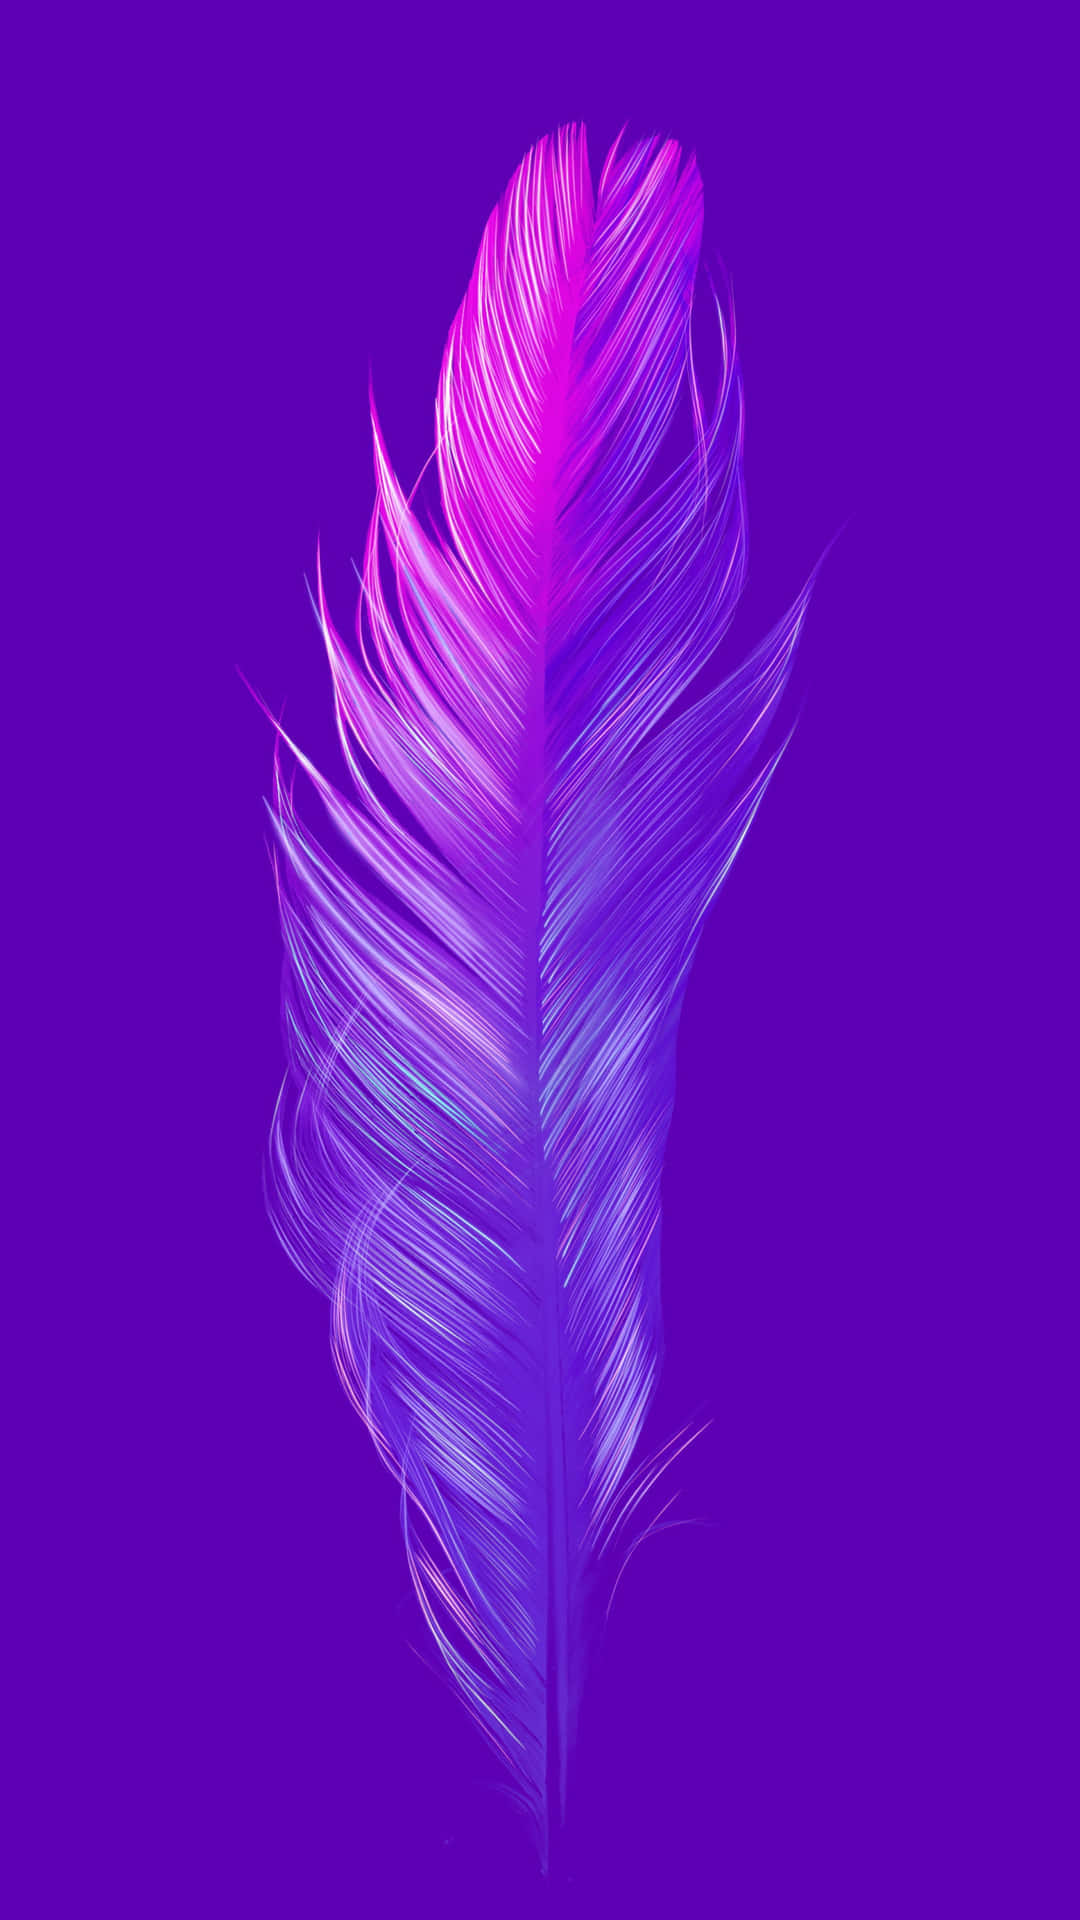 Gorgeous Purple and Blue Peacock Feathers Wallpaper